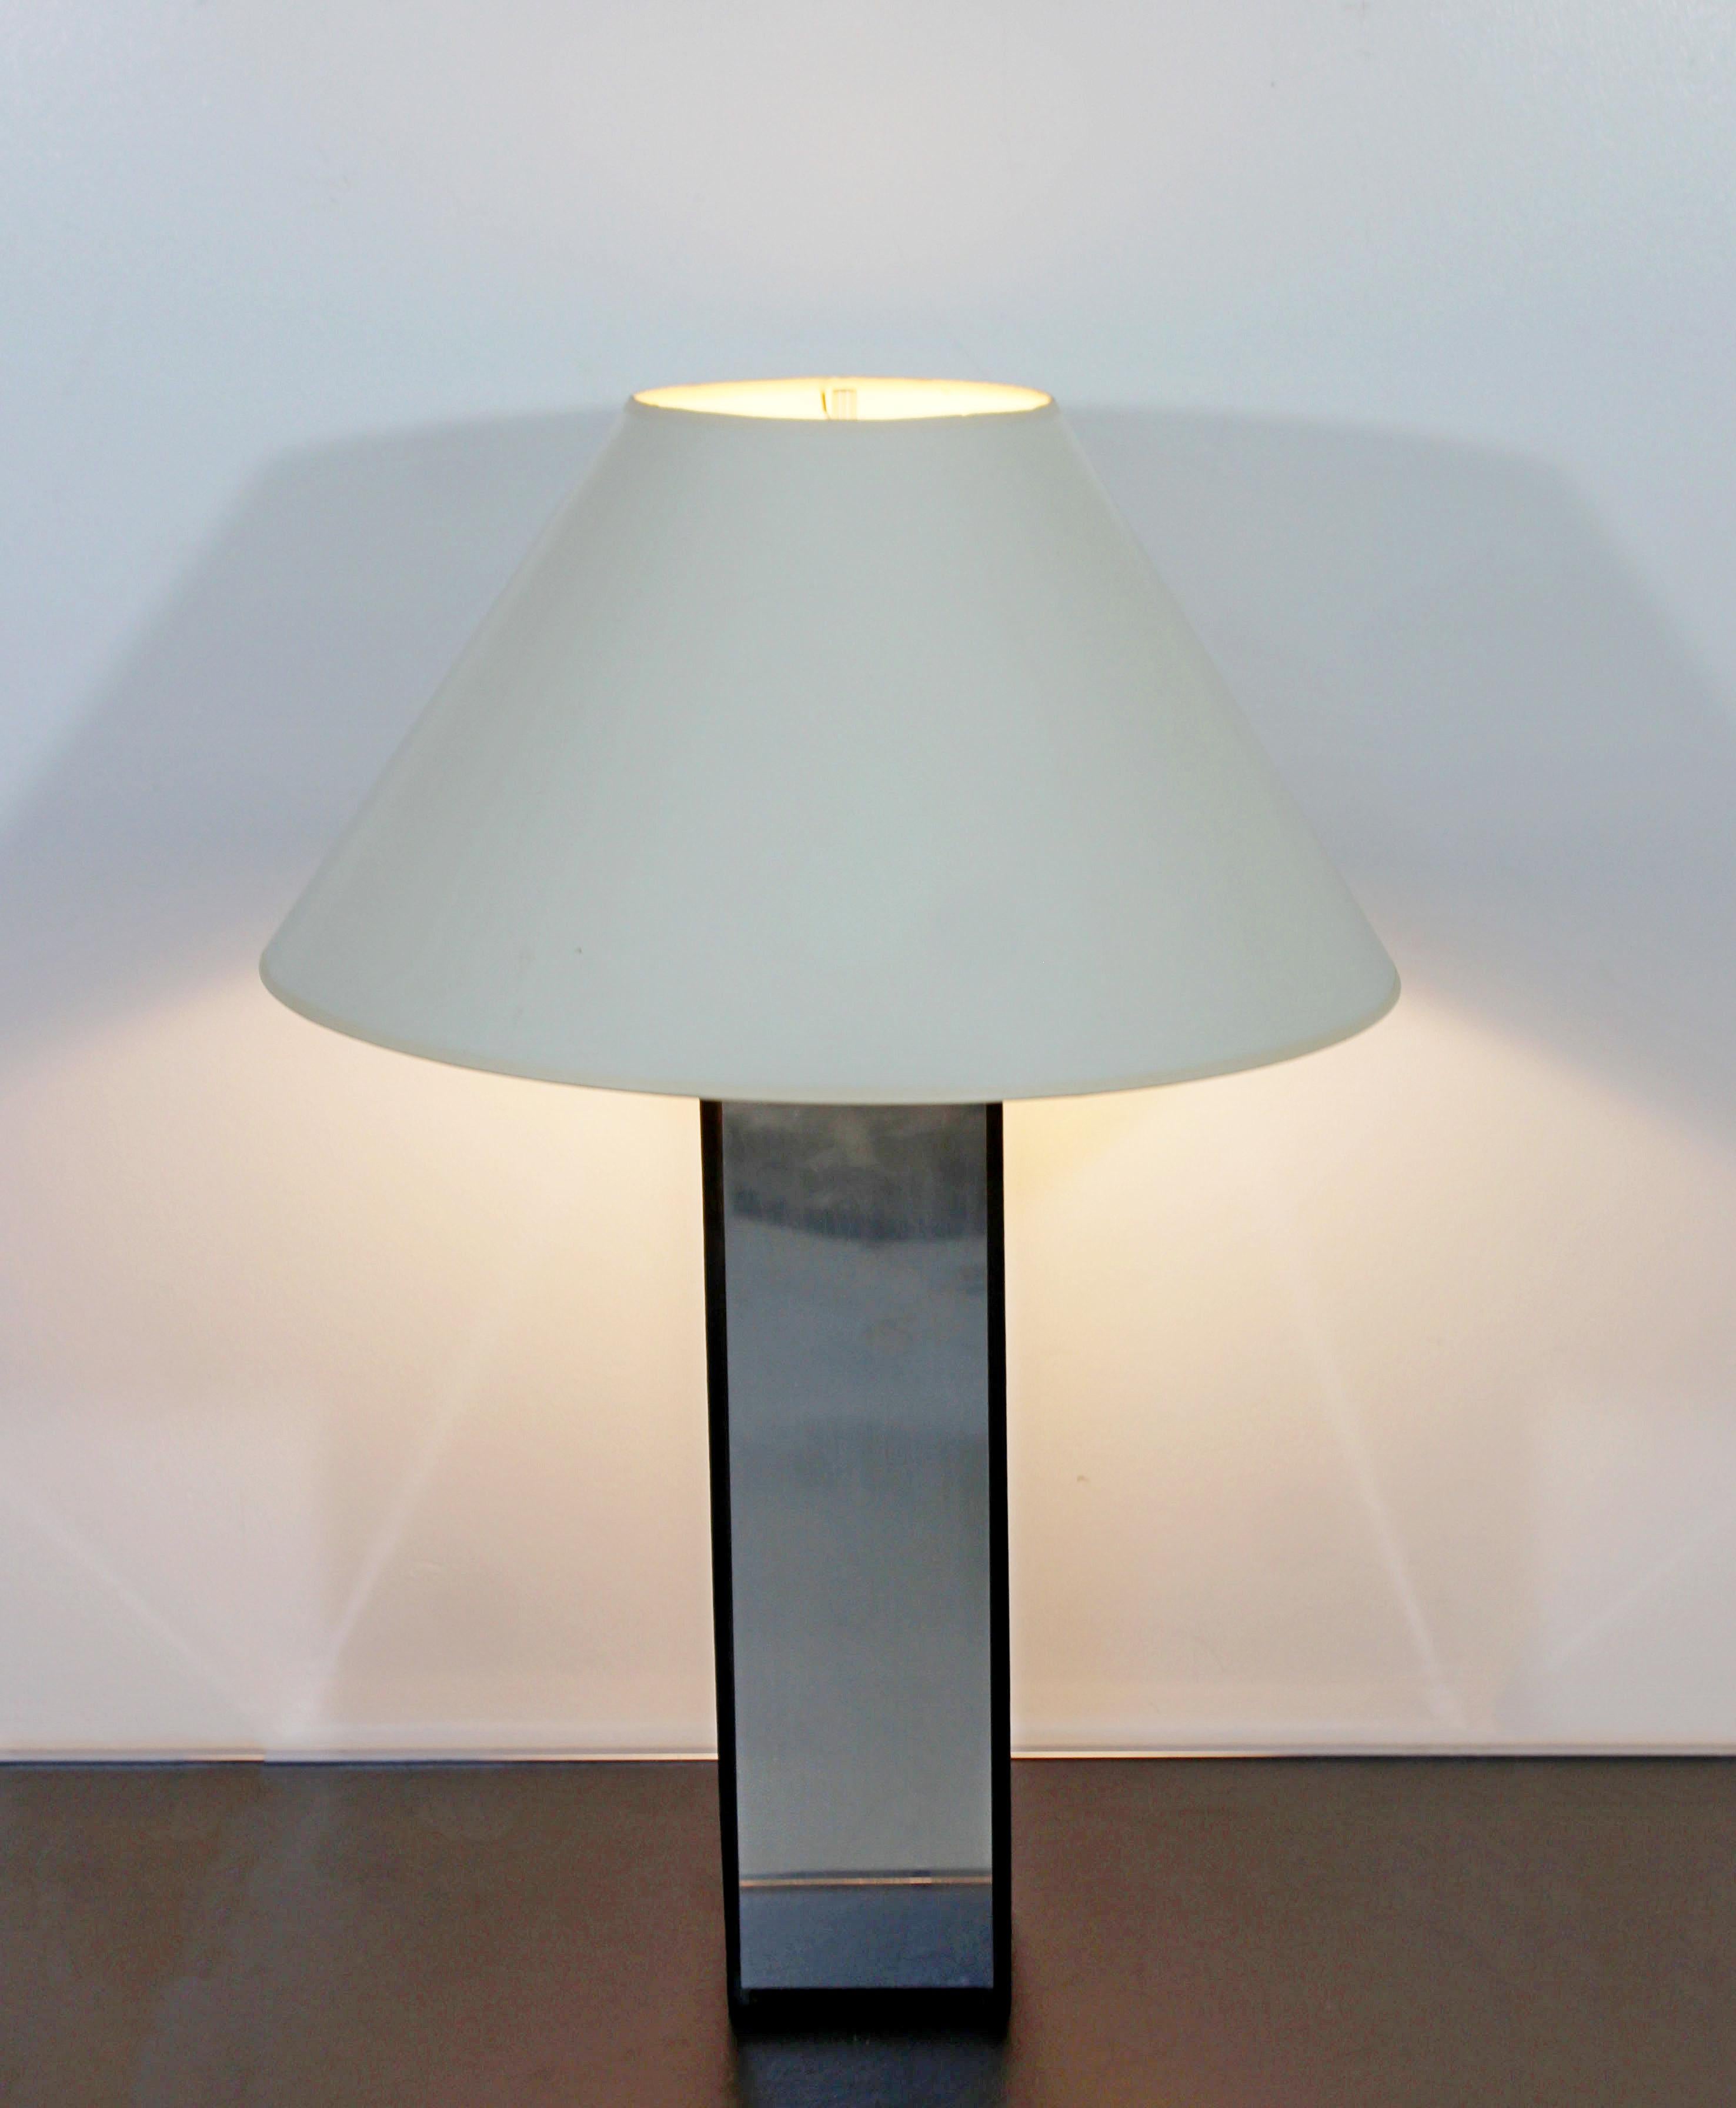 For your consideration is a chic, slate and polished aluminum, table lamp, with original shade and finial, by Laurel Lamp Co., circa the 1970s. In excellent condition. The dimensions of the lamp are 6